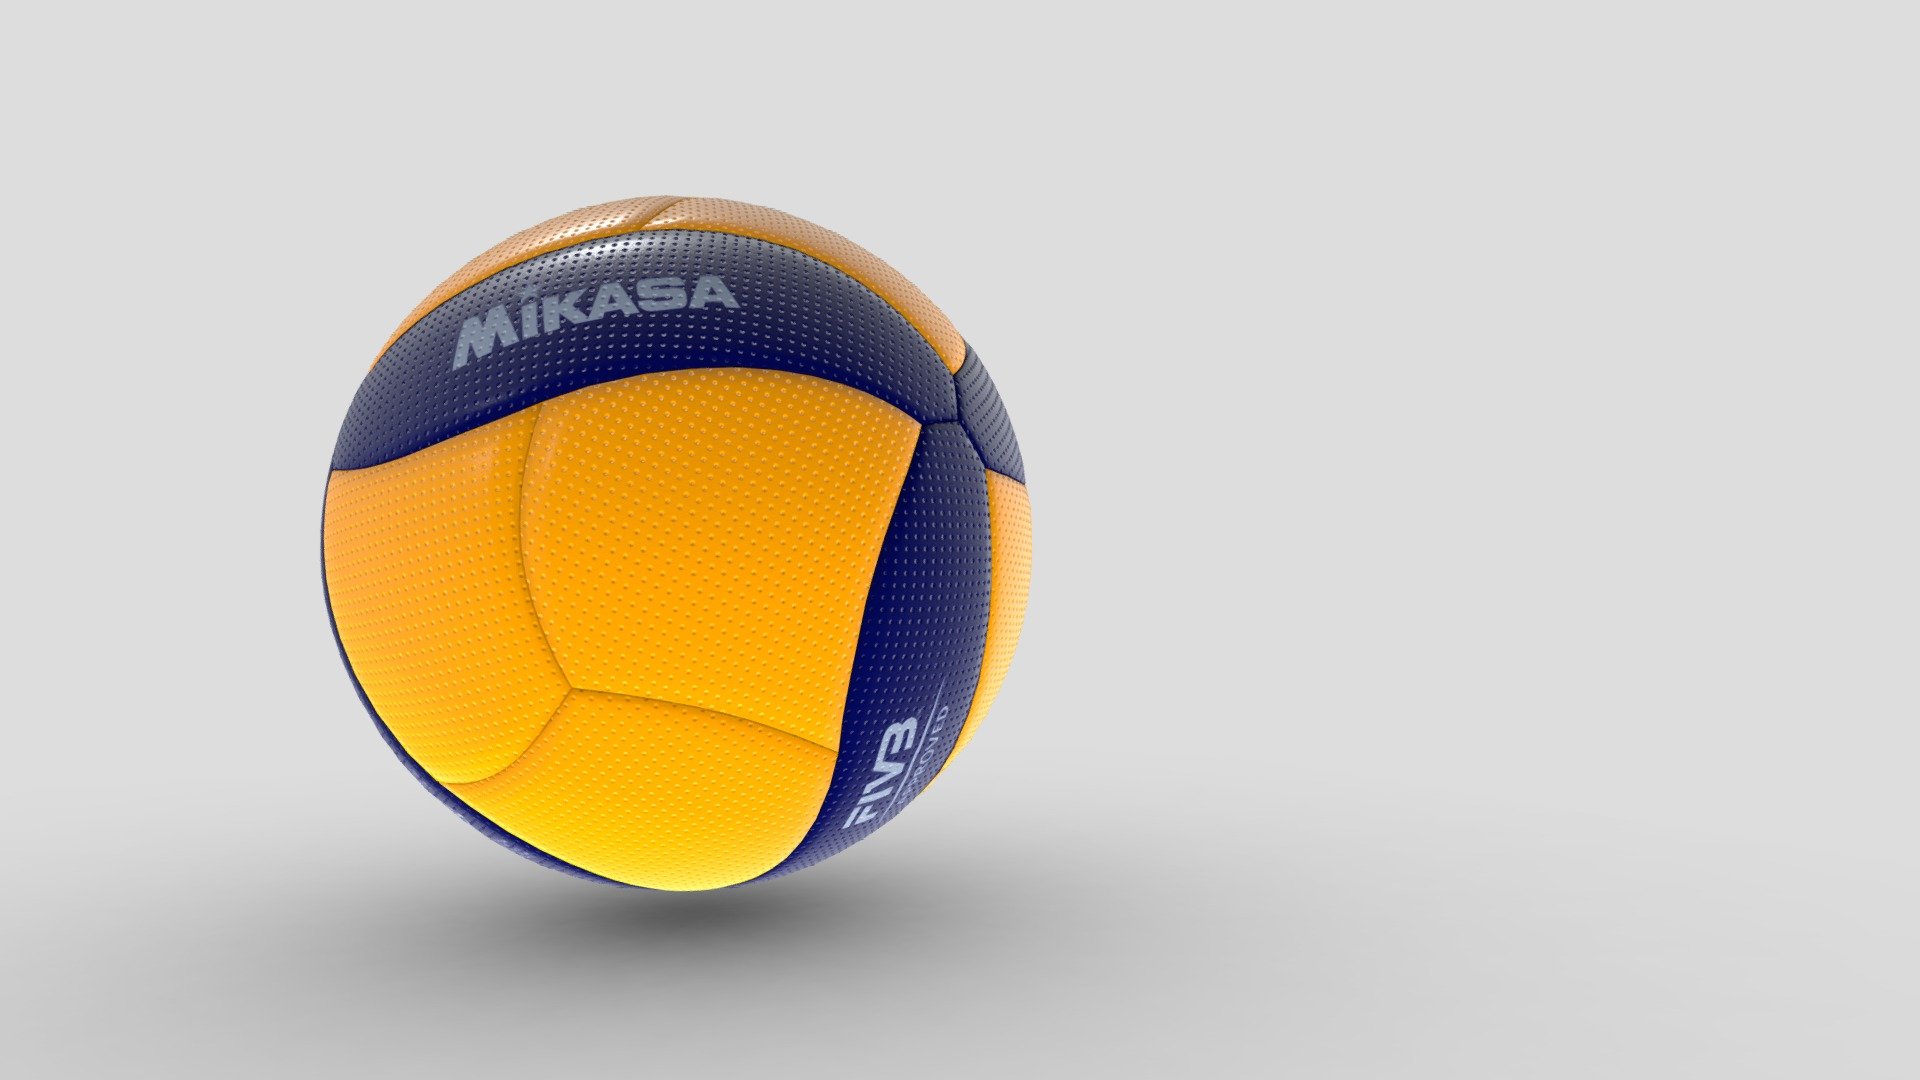 Ball Mikasa V200W volleyball
I am fond of volleyball. And I decided to draw this ball, I wanted to draw this one based on the geometry and topology of the structure of this ball.
Youtube review - click! - M0001 Volleyball Mikasa V200W ball - Buy Royalty Free 3D model by VRA (@architect47) 3d model